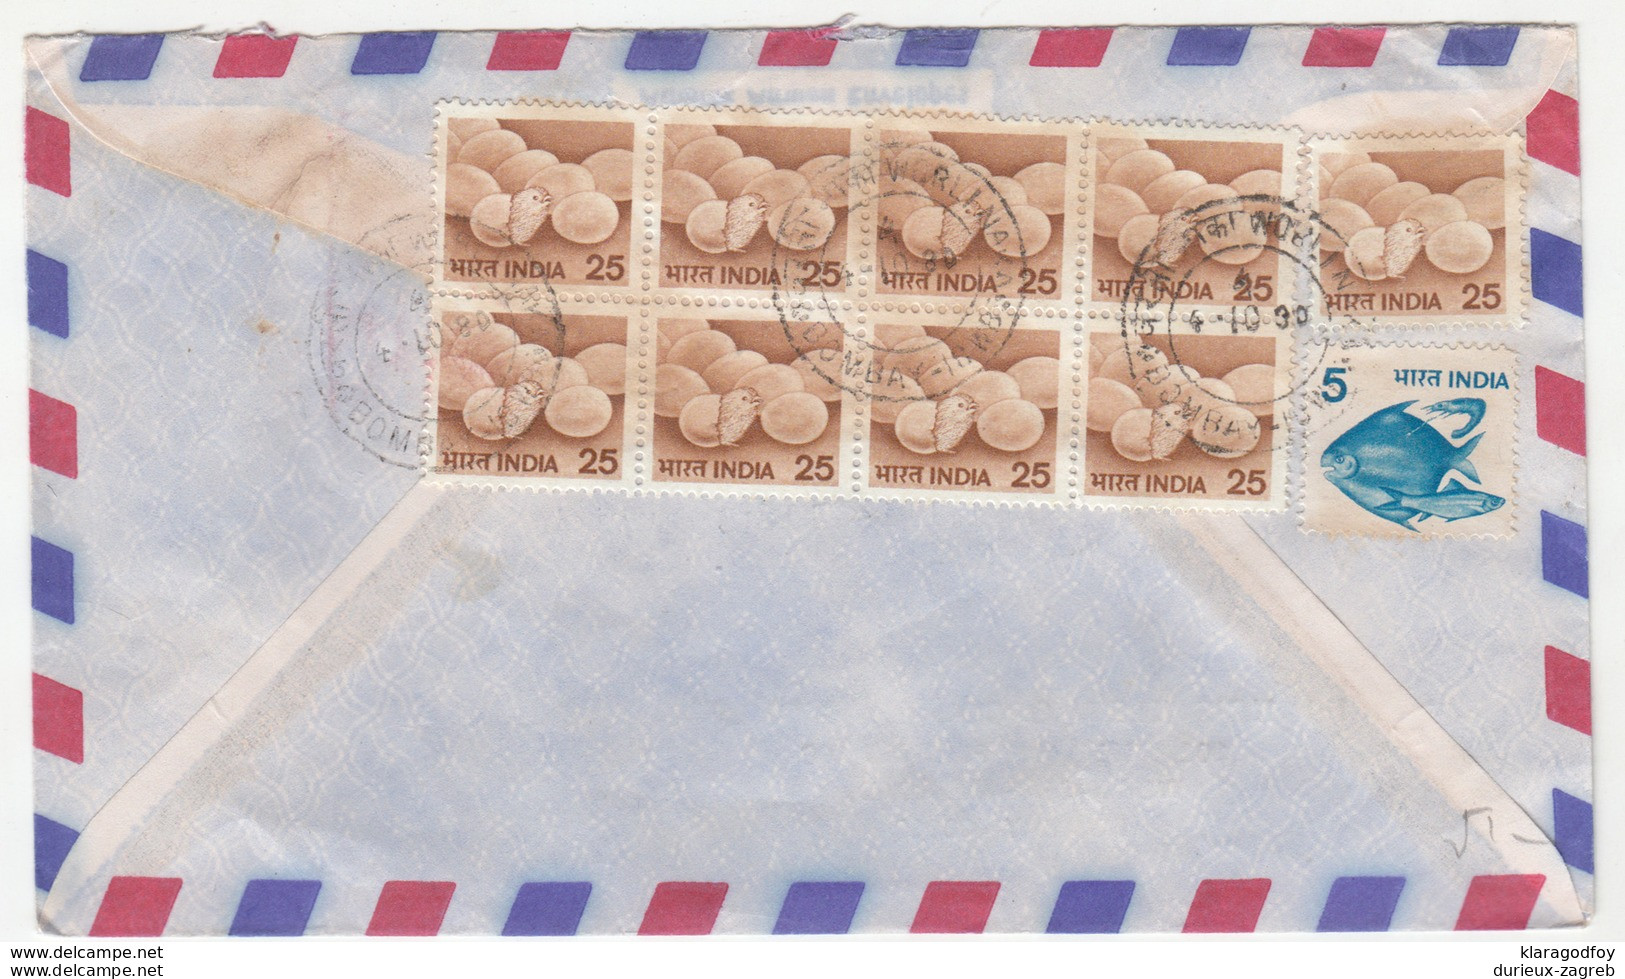 Francis Klein & Co, Bombay Company Air Mail Letter Cover Travelled 1980 To Switzerland B180725 - Briefe U. Dokumente